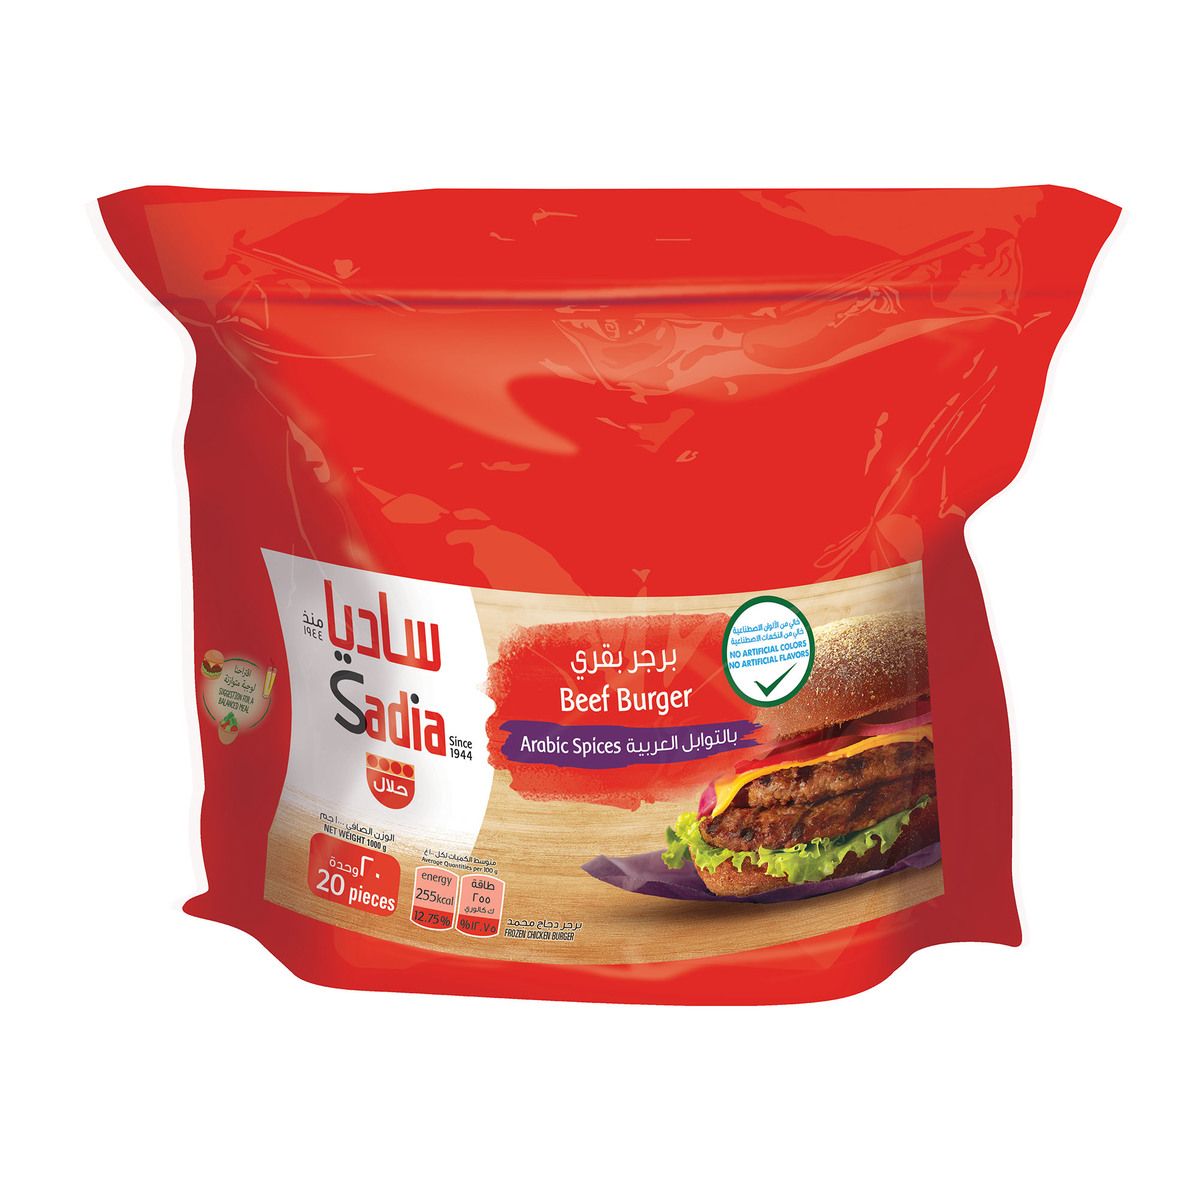 Beef Burger Arabic Spices (Pack of 20) 1kg